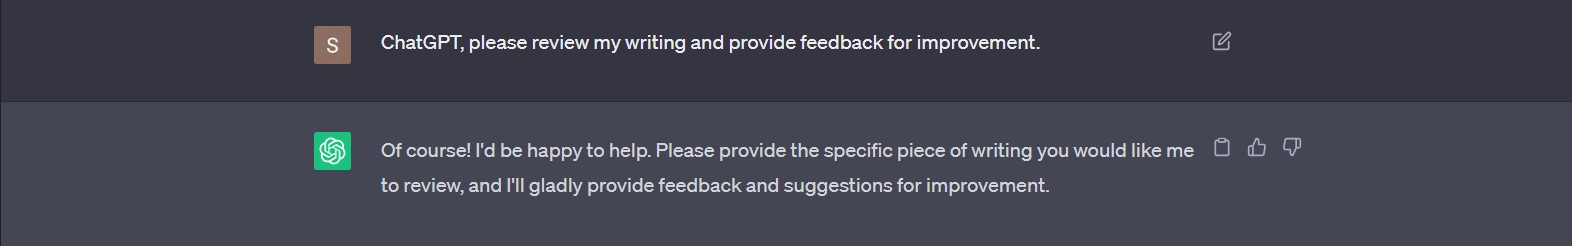  chatgpt prompt response to feedback